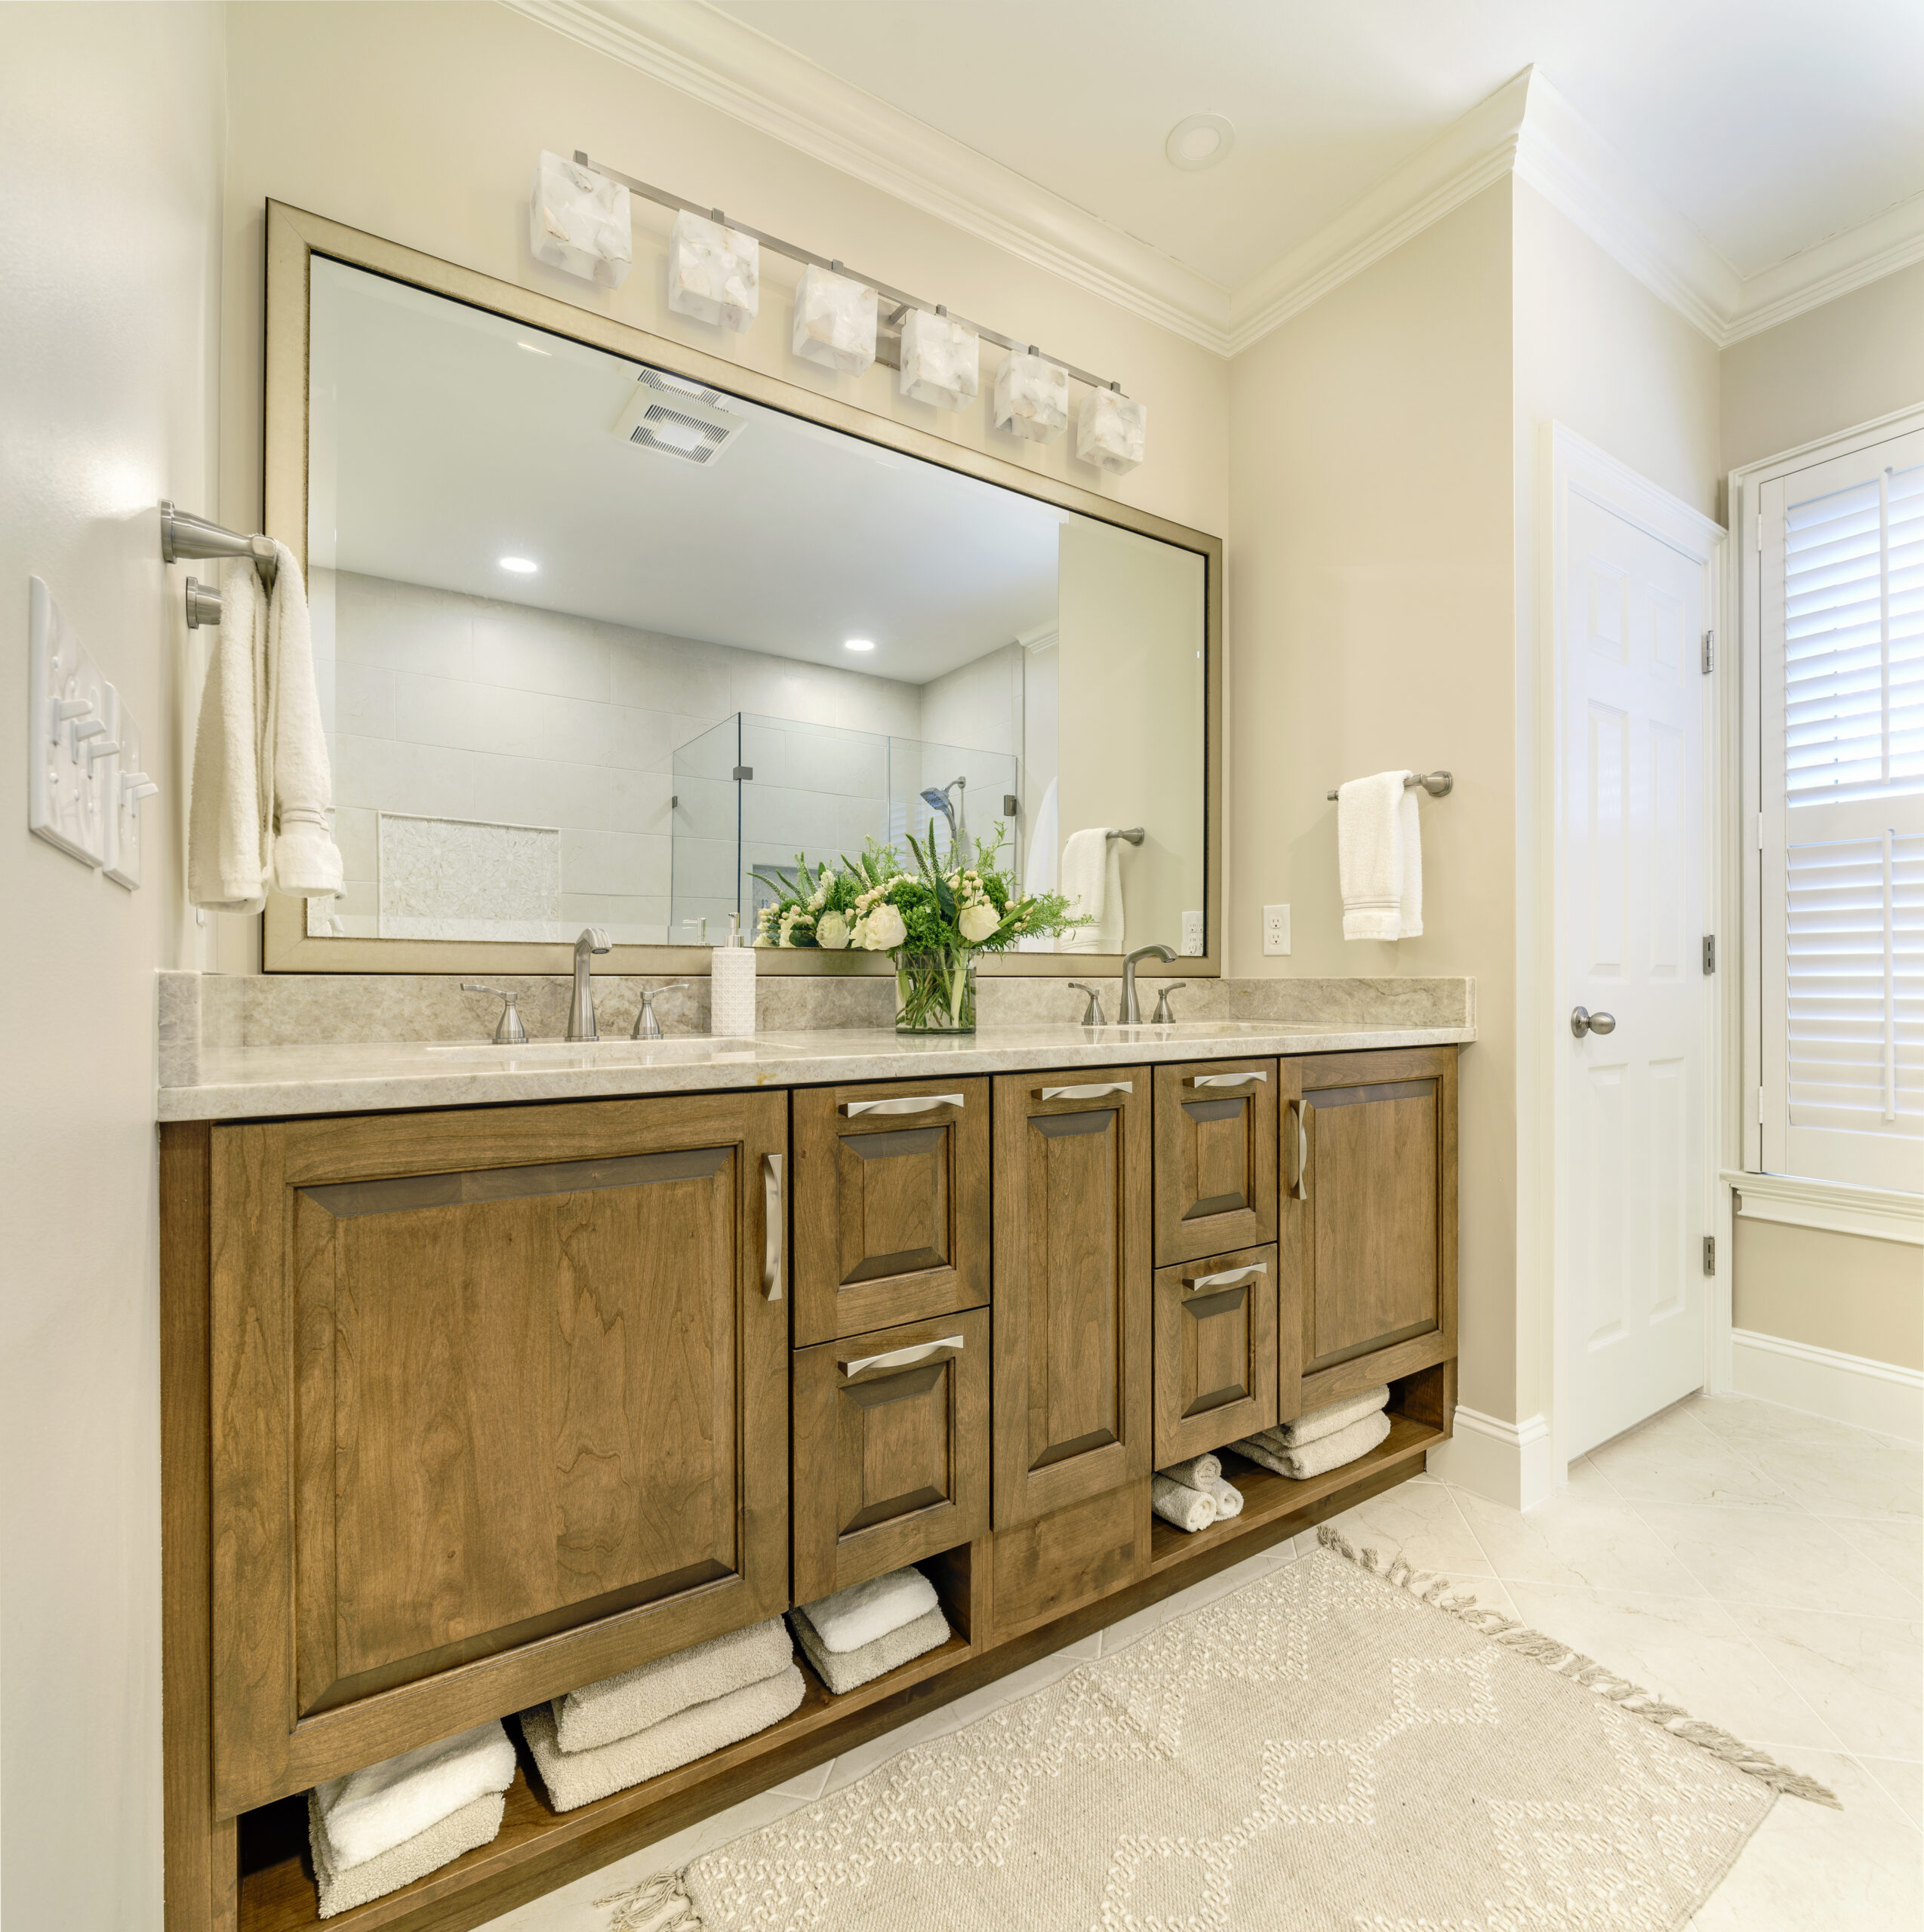 These clients had such a clear vision for their bathroom remodeling project – to make their new bath and shower areas feel like a spa.